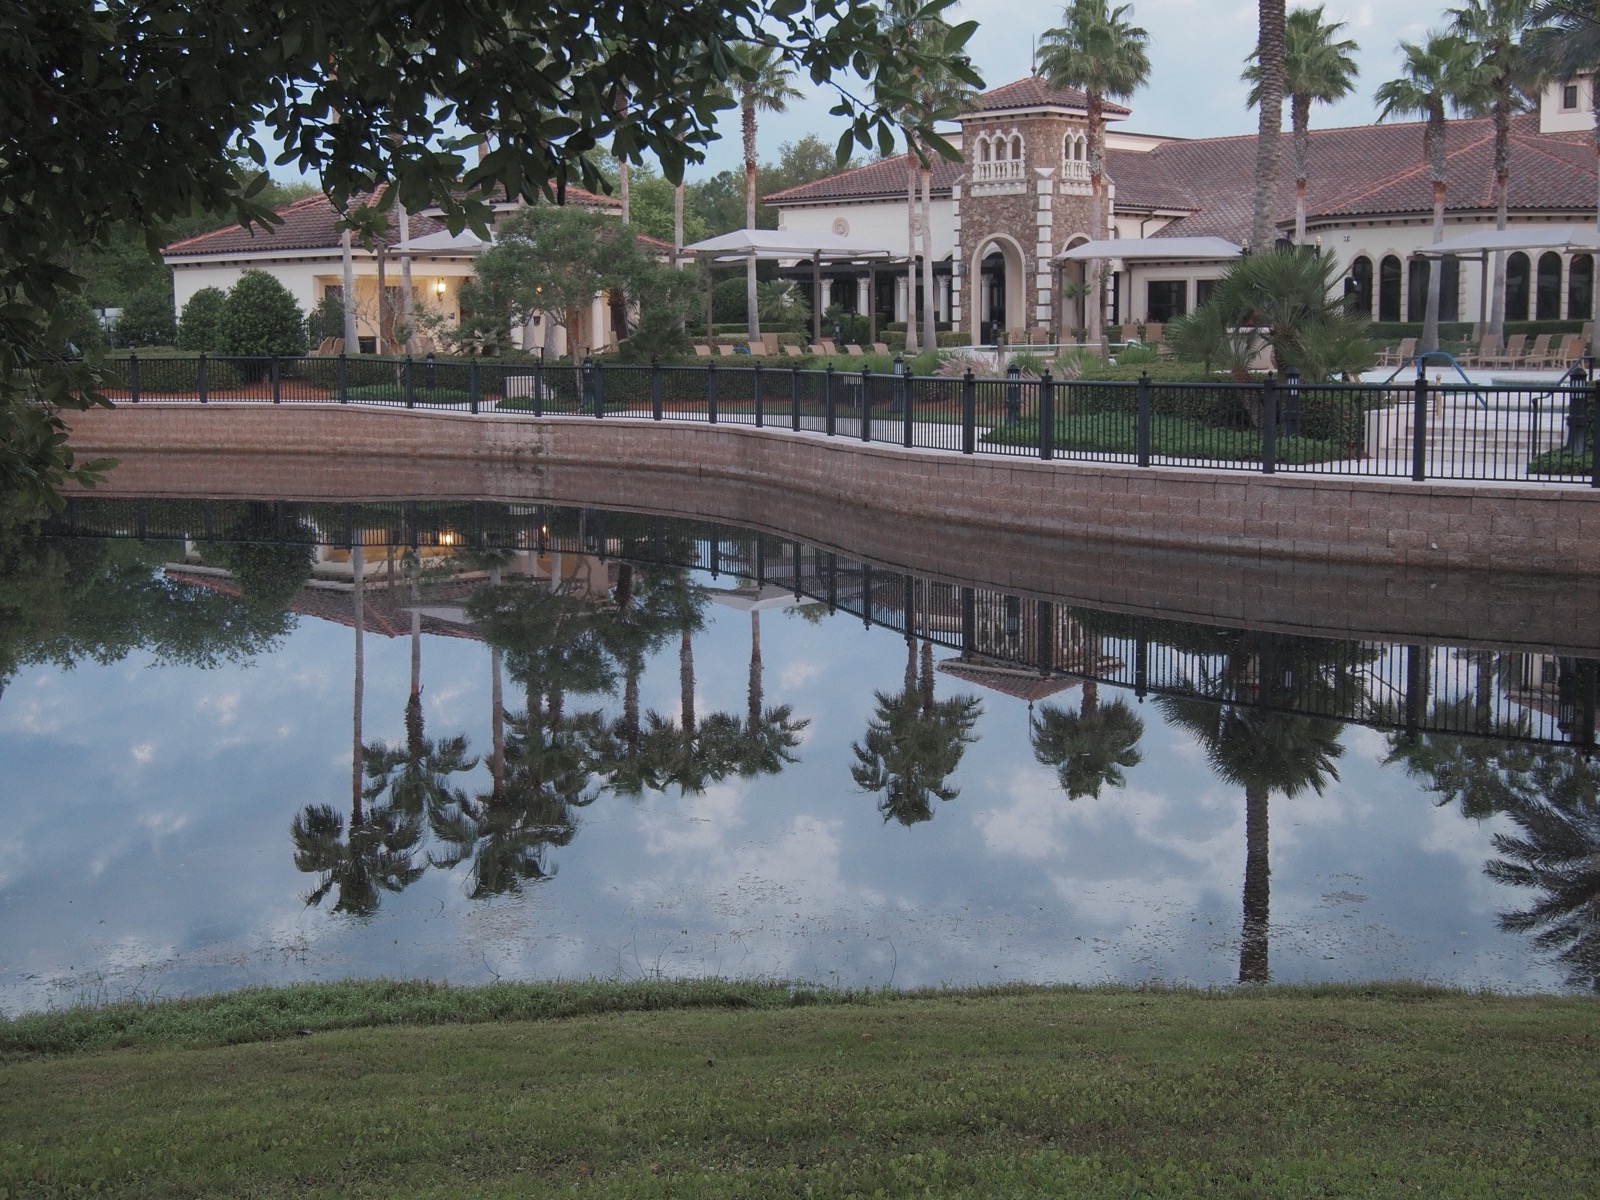 Palm trees lining the resort-style pool, reflecting in the surface of a retention pond